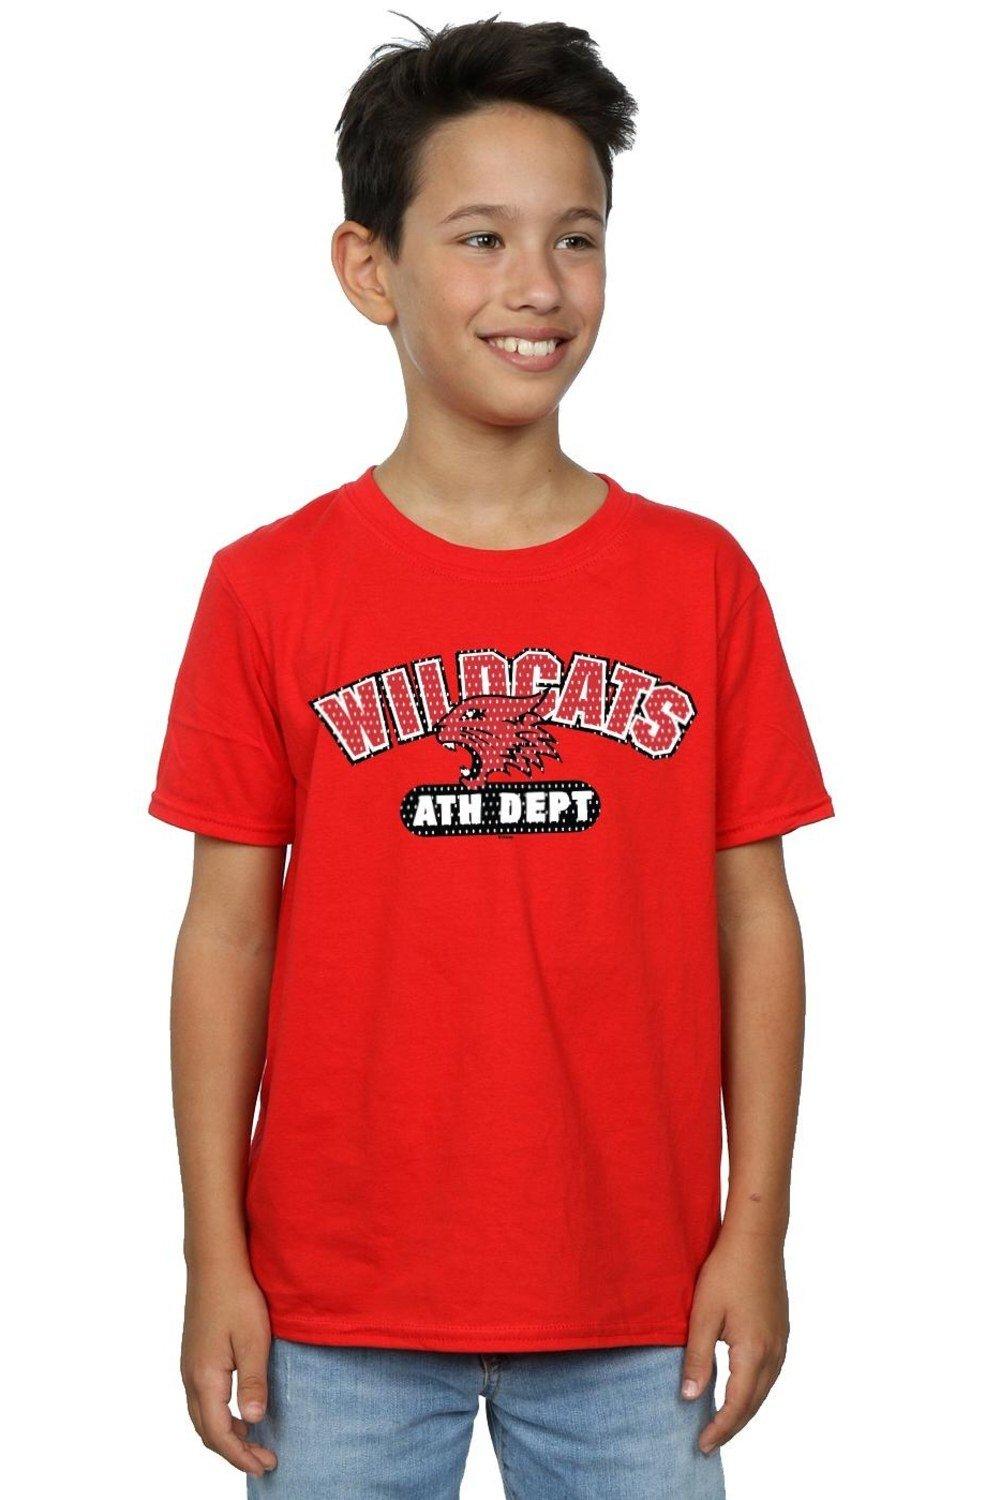 High School Musical The Musical Wildcats Athletic T-Shirt